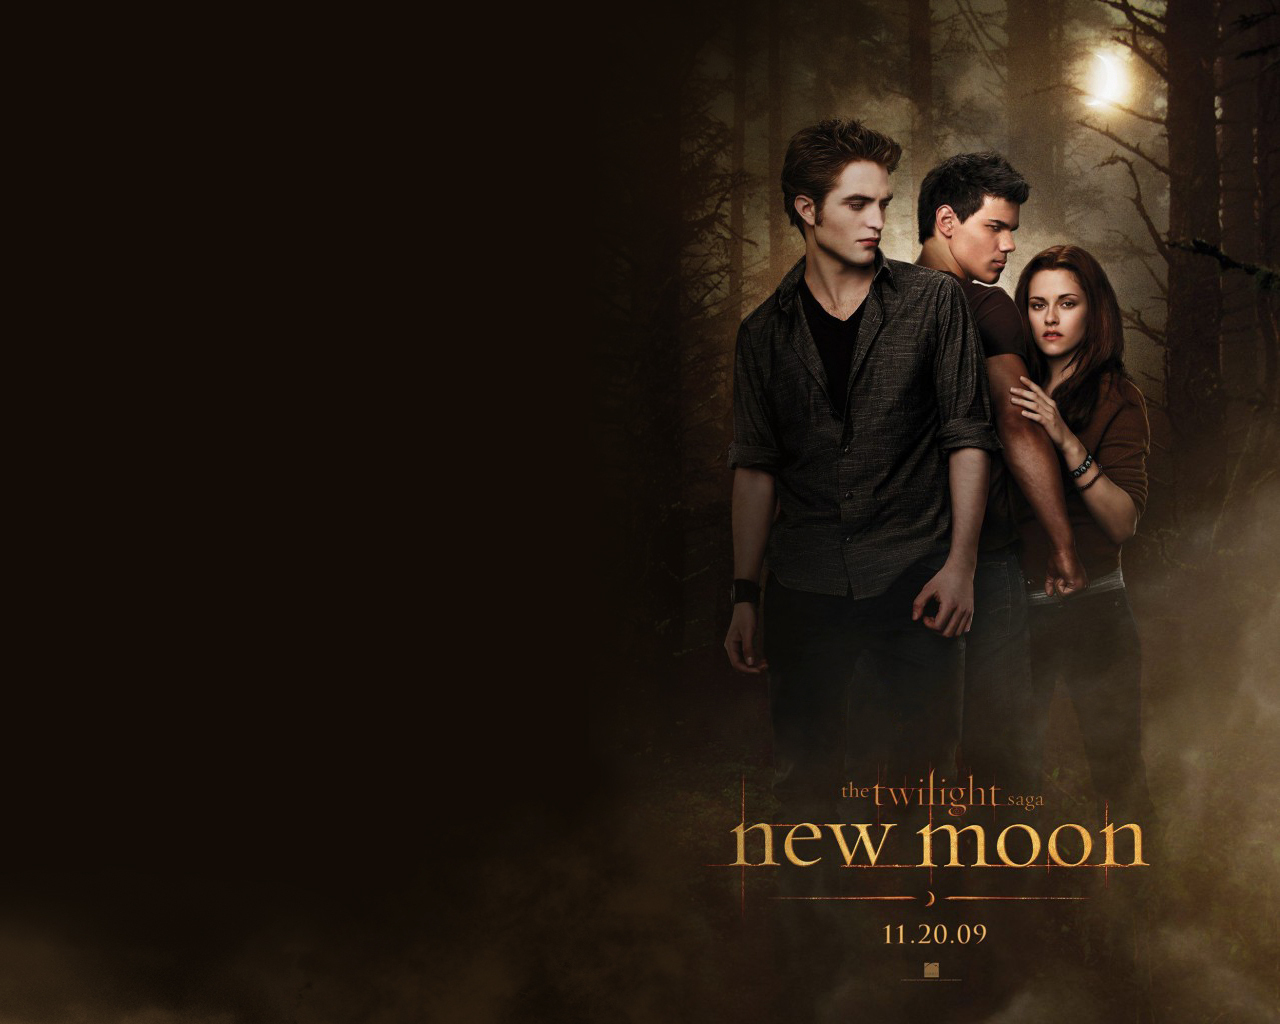 Twilight Series Image Wallpaper Of New Moon Movie Poster